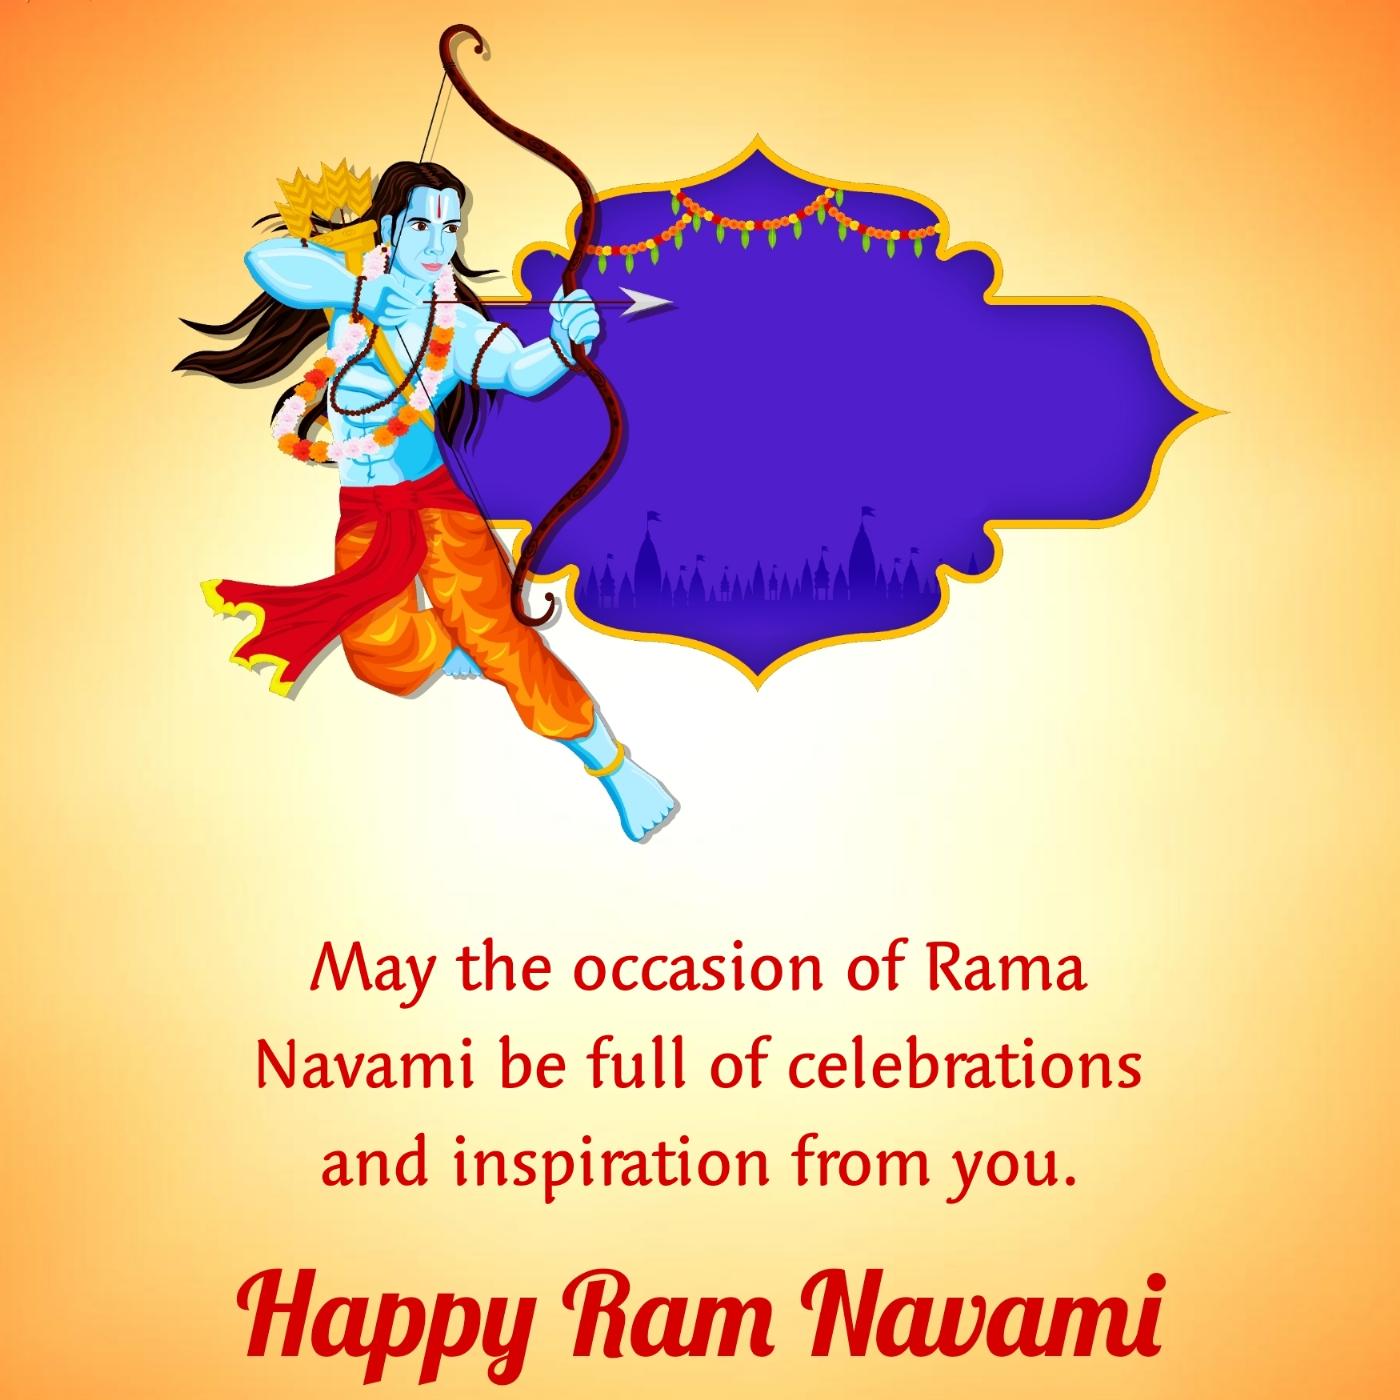 May the occasion of Rama Navami be full of celebrations